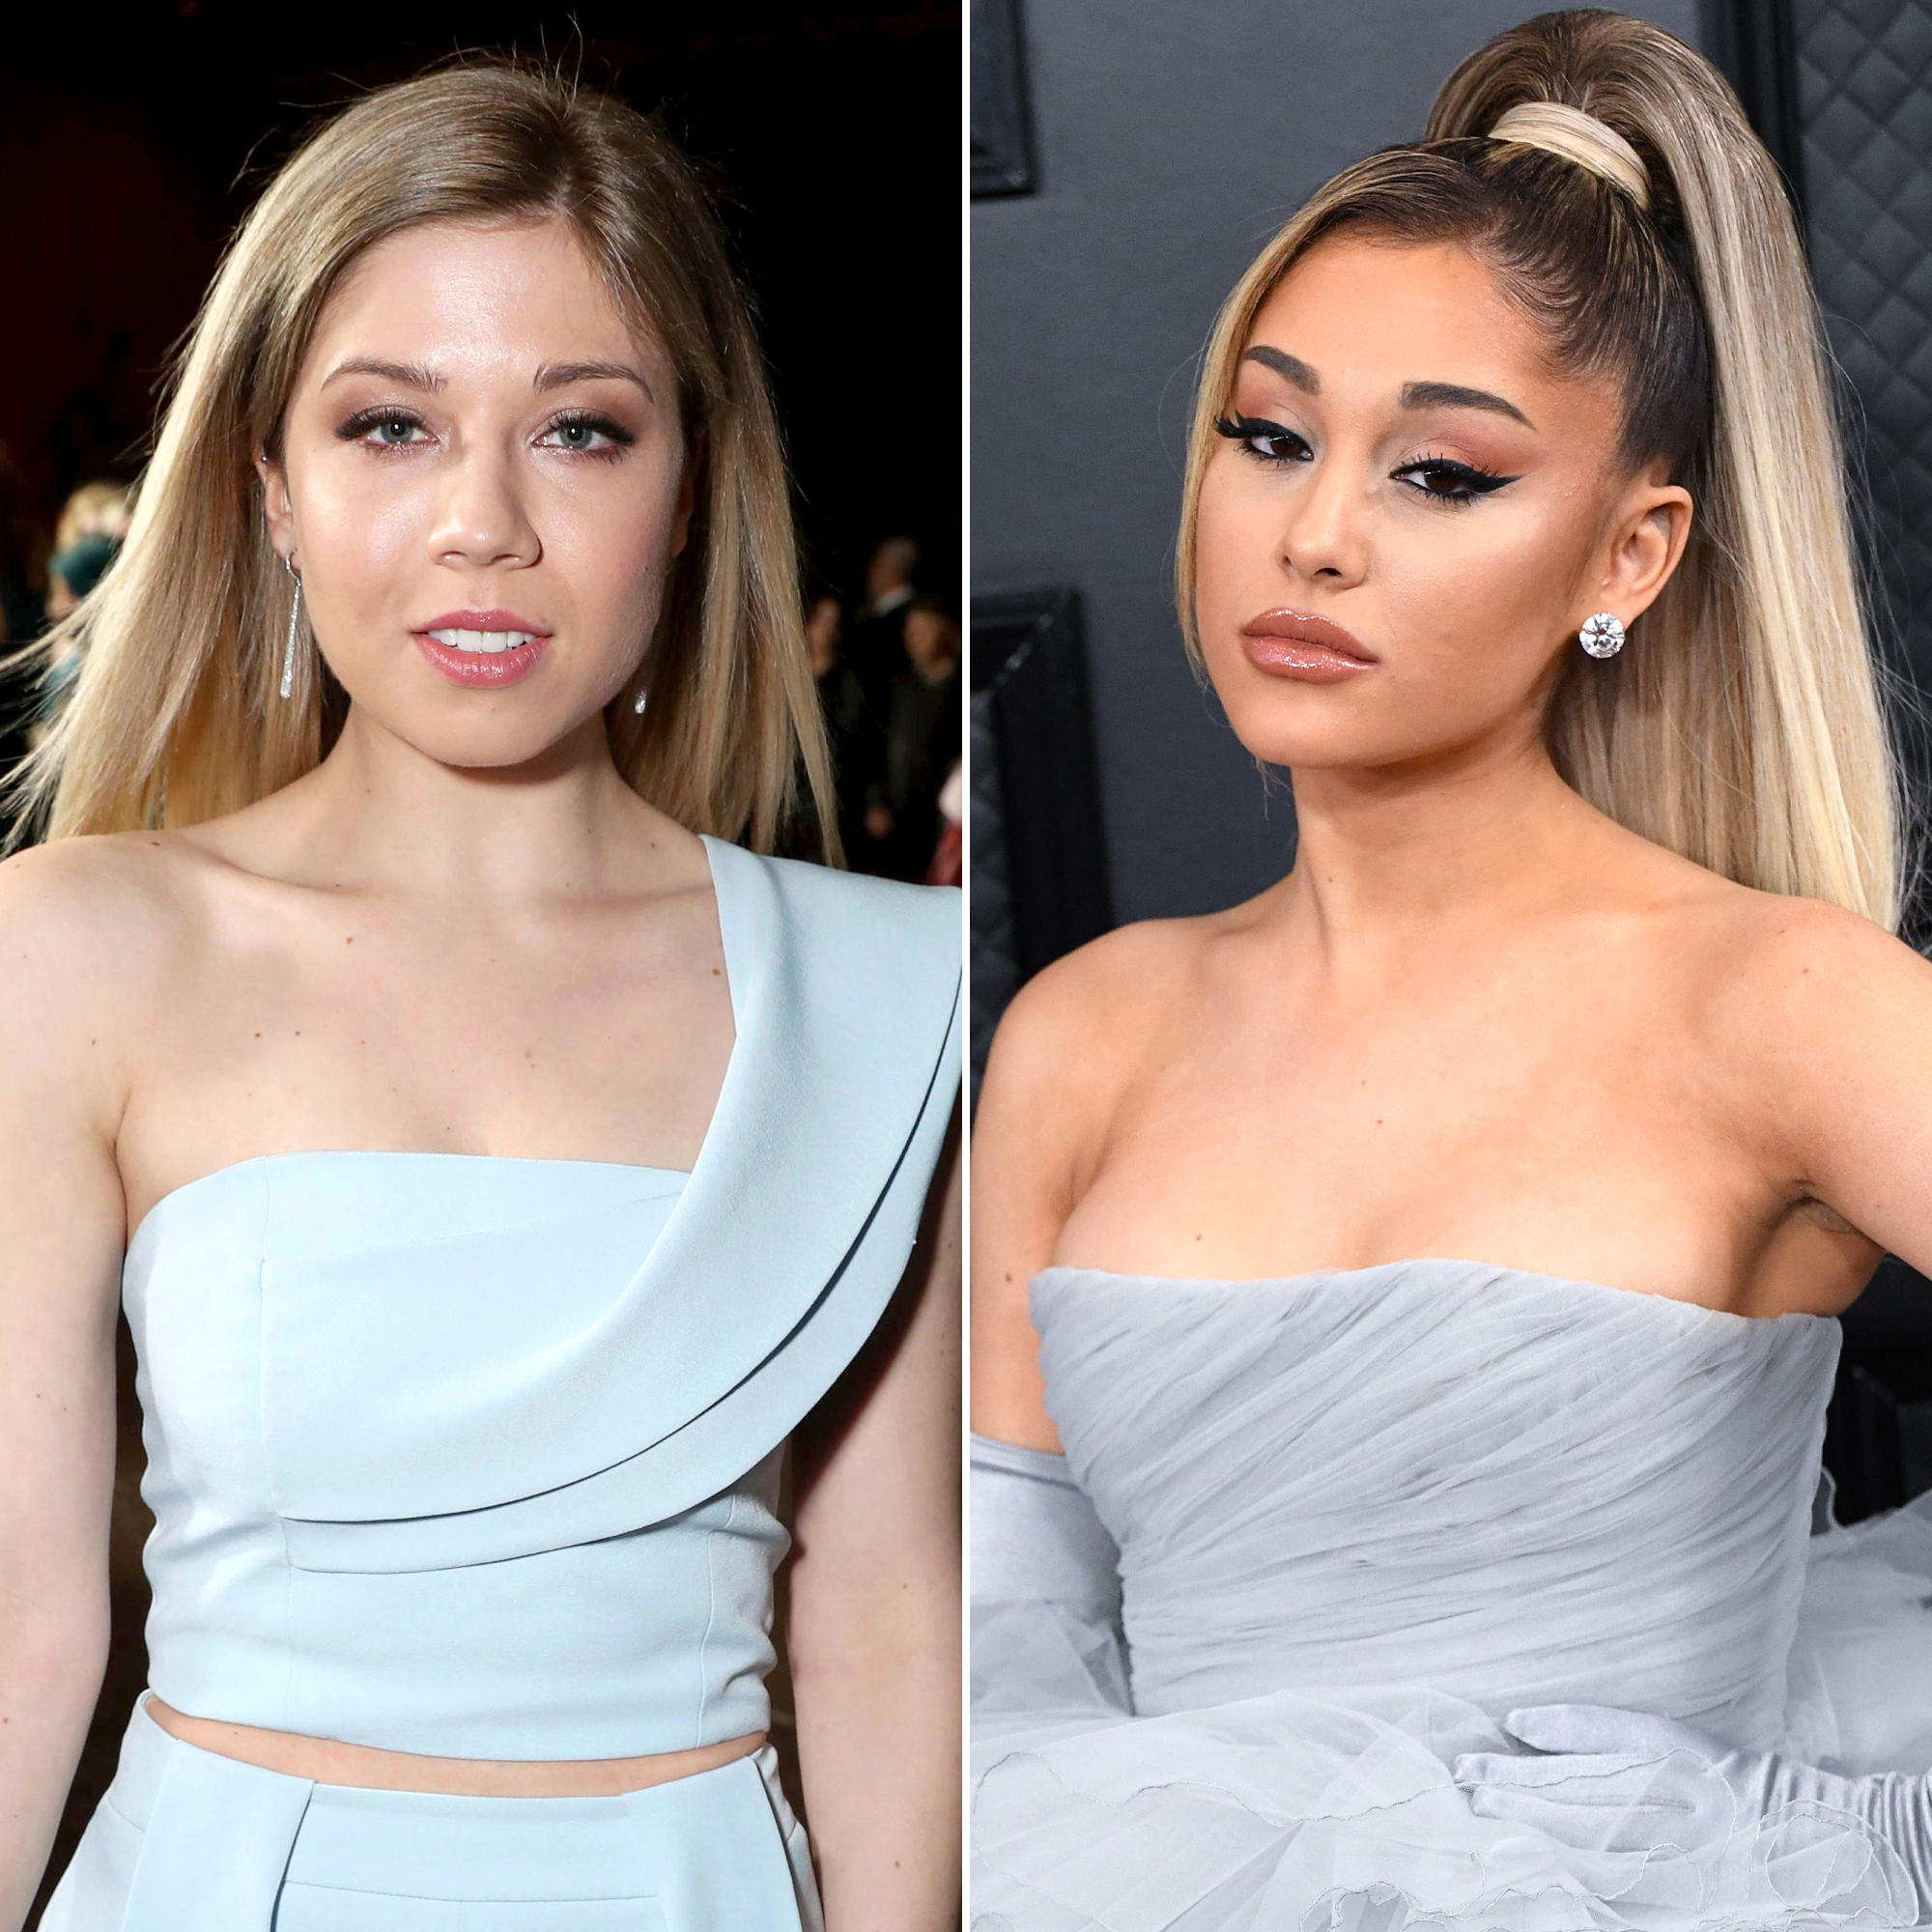 Jennette McCurdy Discusses Working With Ariana Grande on 'Sam & Cat'